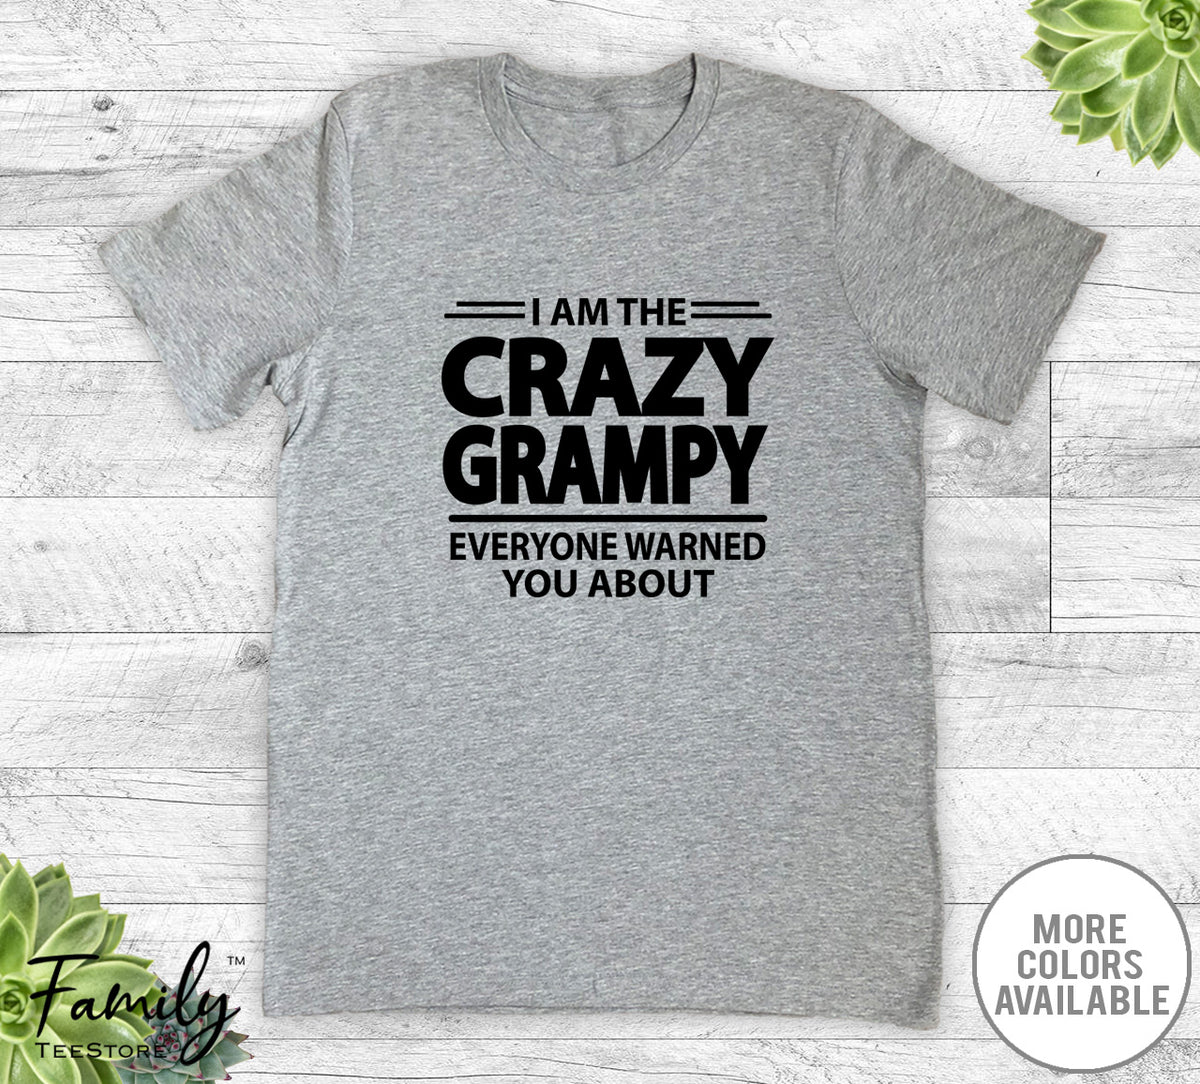 I Am The Crazy Grampy Everyone Warned You About - Unisex T-shirt - Grampy Shirt - Grampy Gift - familyteeprints